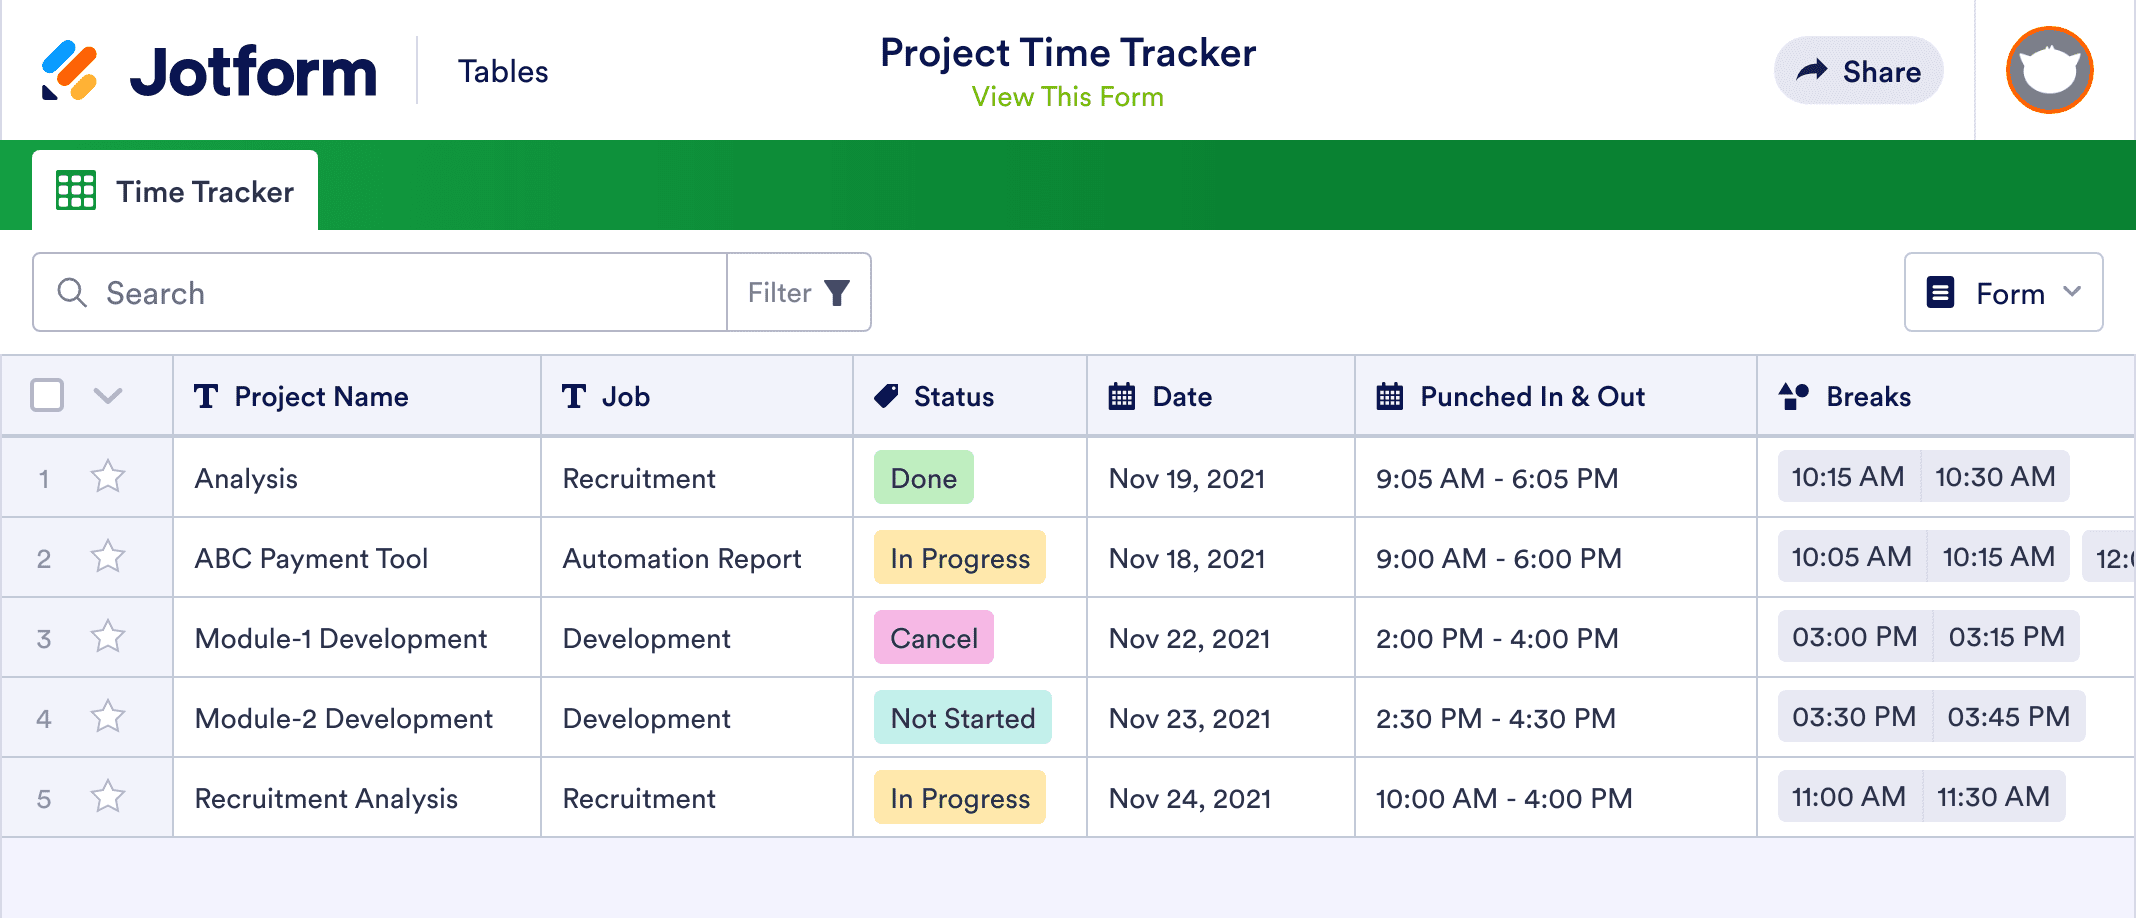 Project Time Tracker